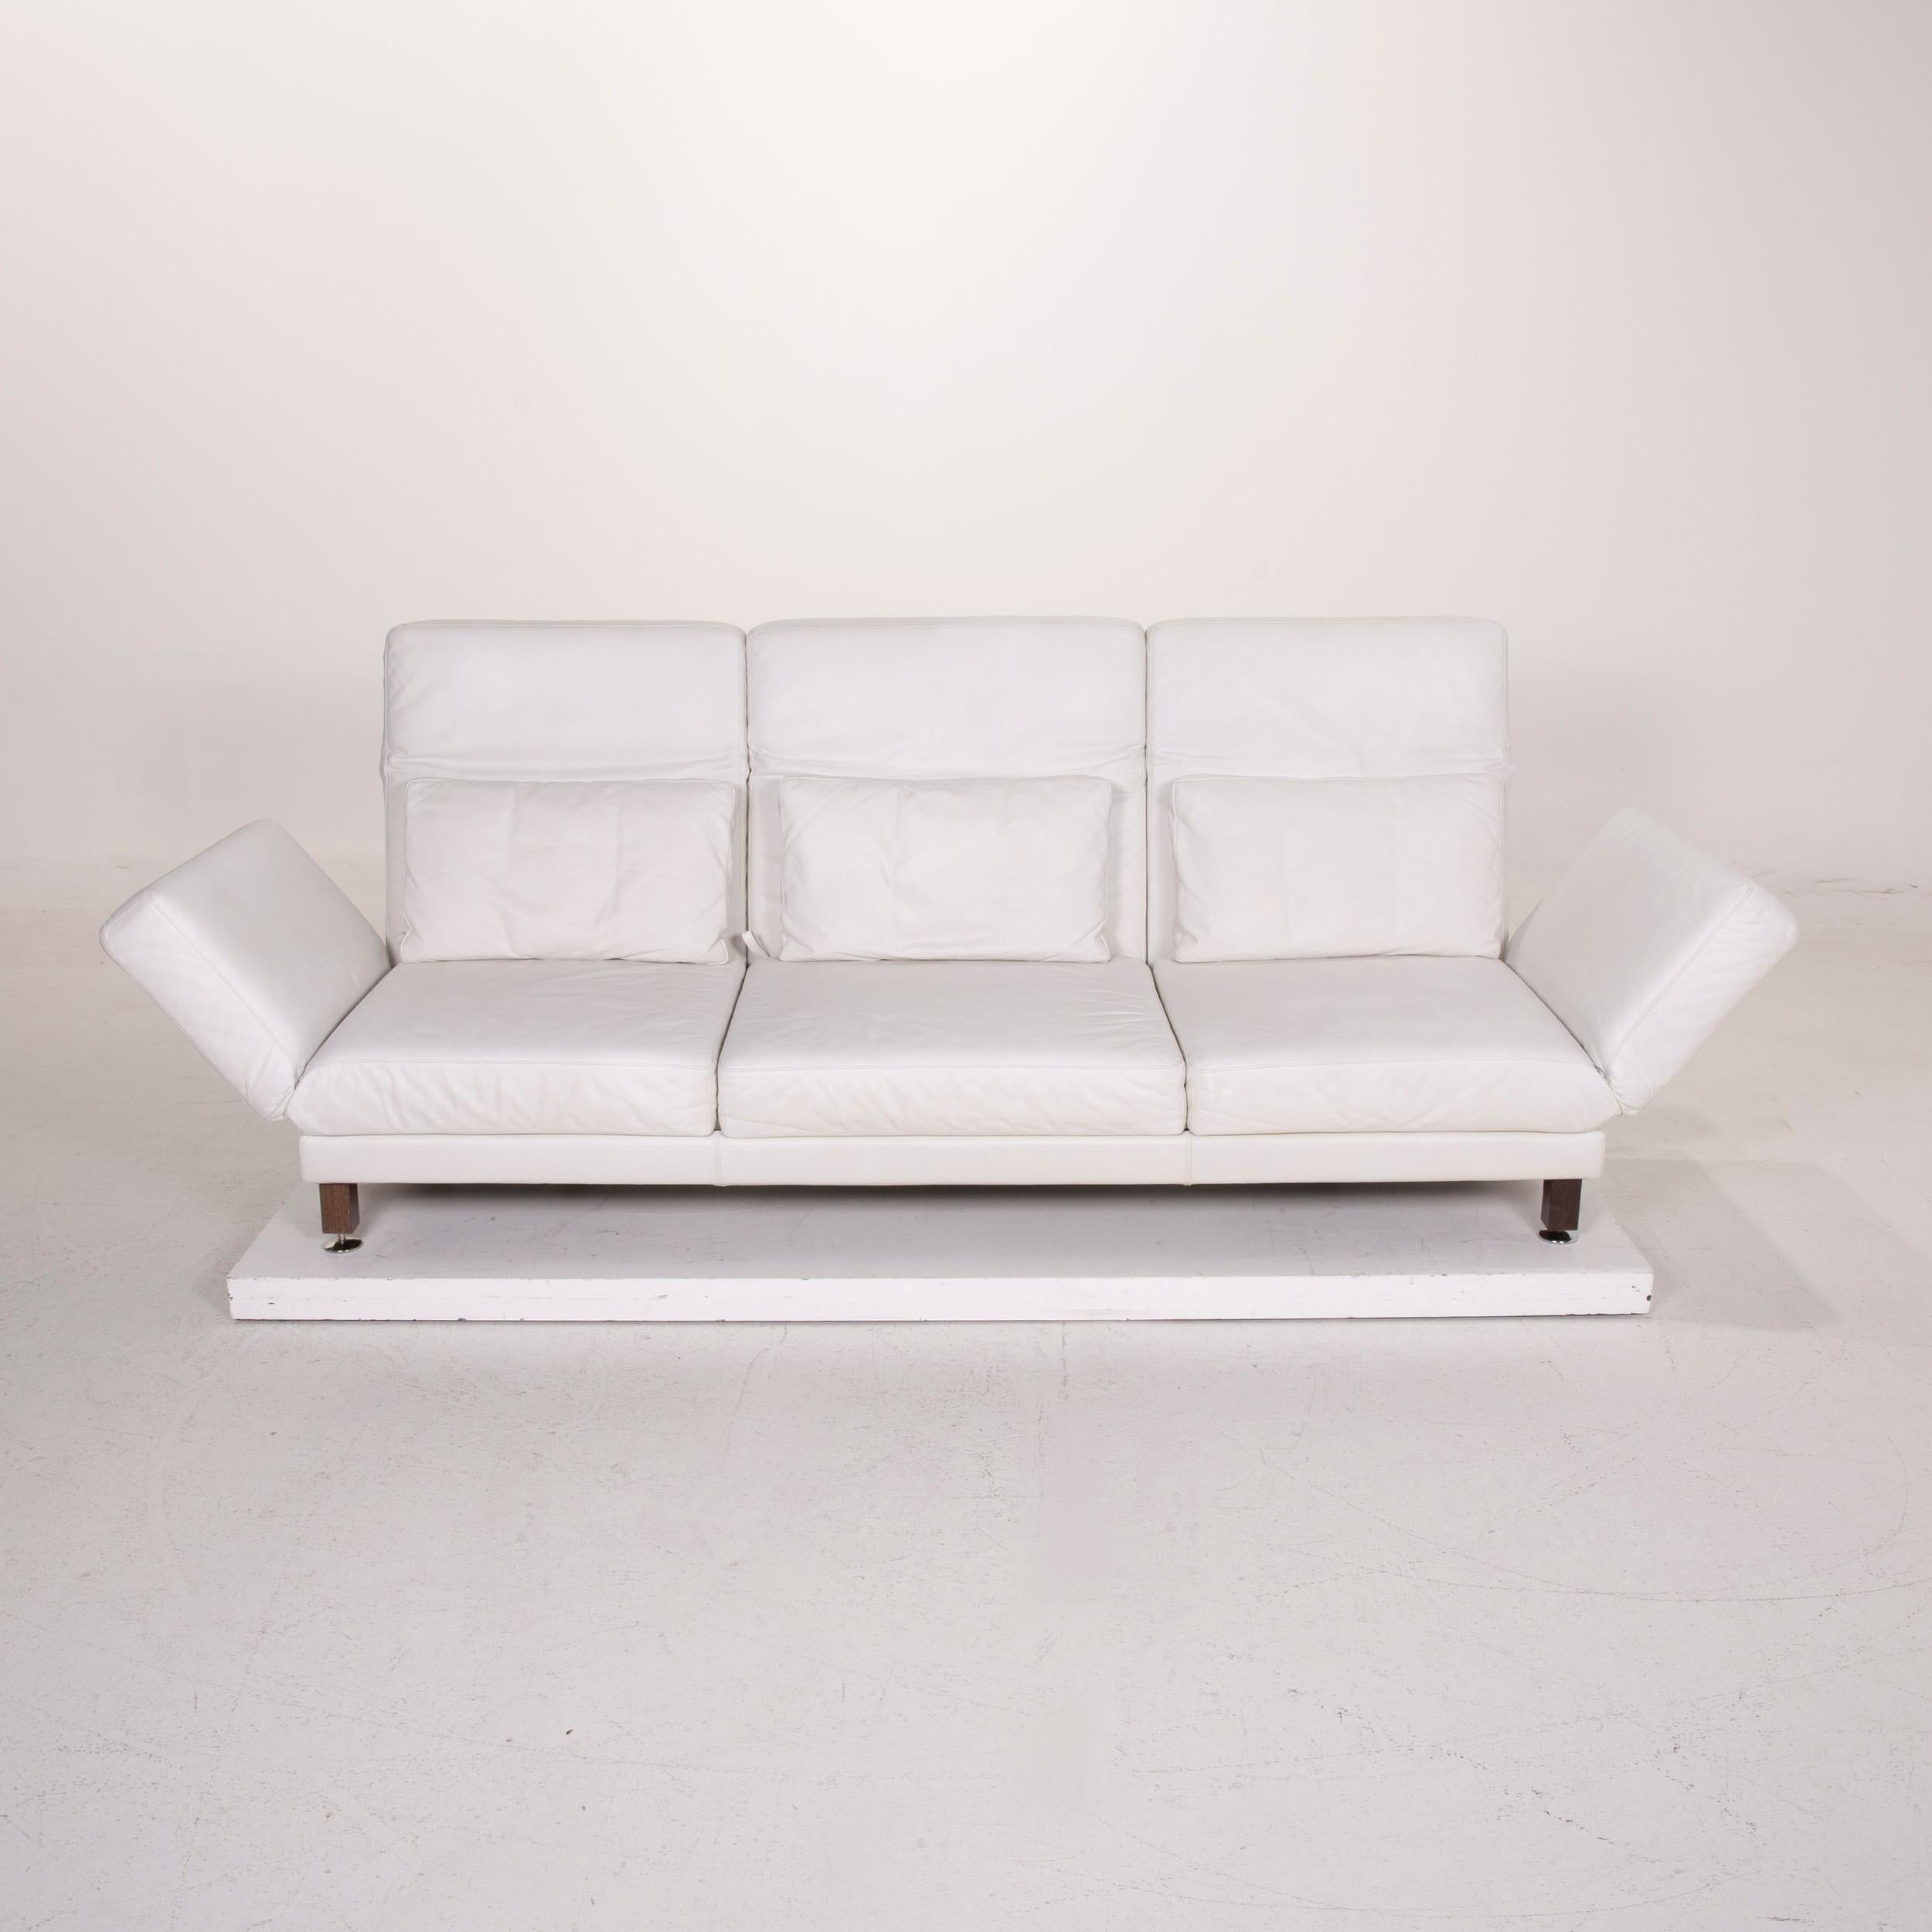 Brühl & Sippold Moule Leather Sofa Set White Three-Seater Relax Function Stool 9